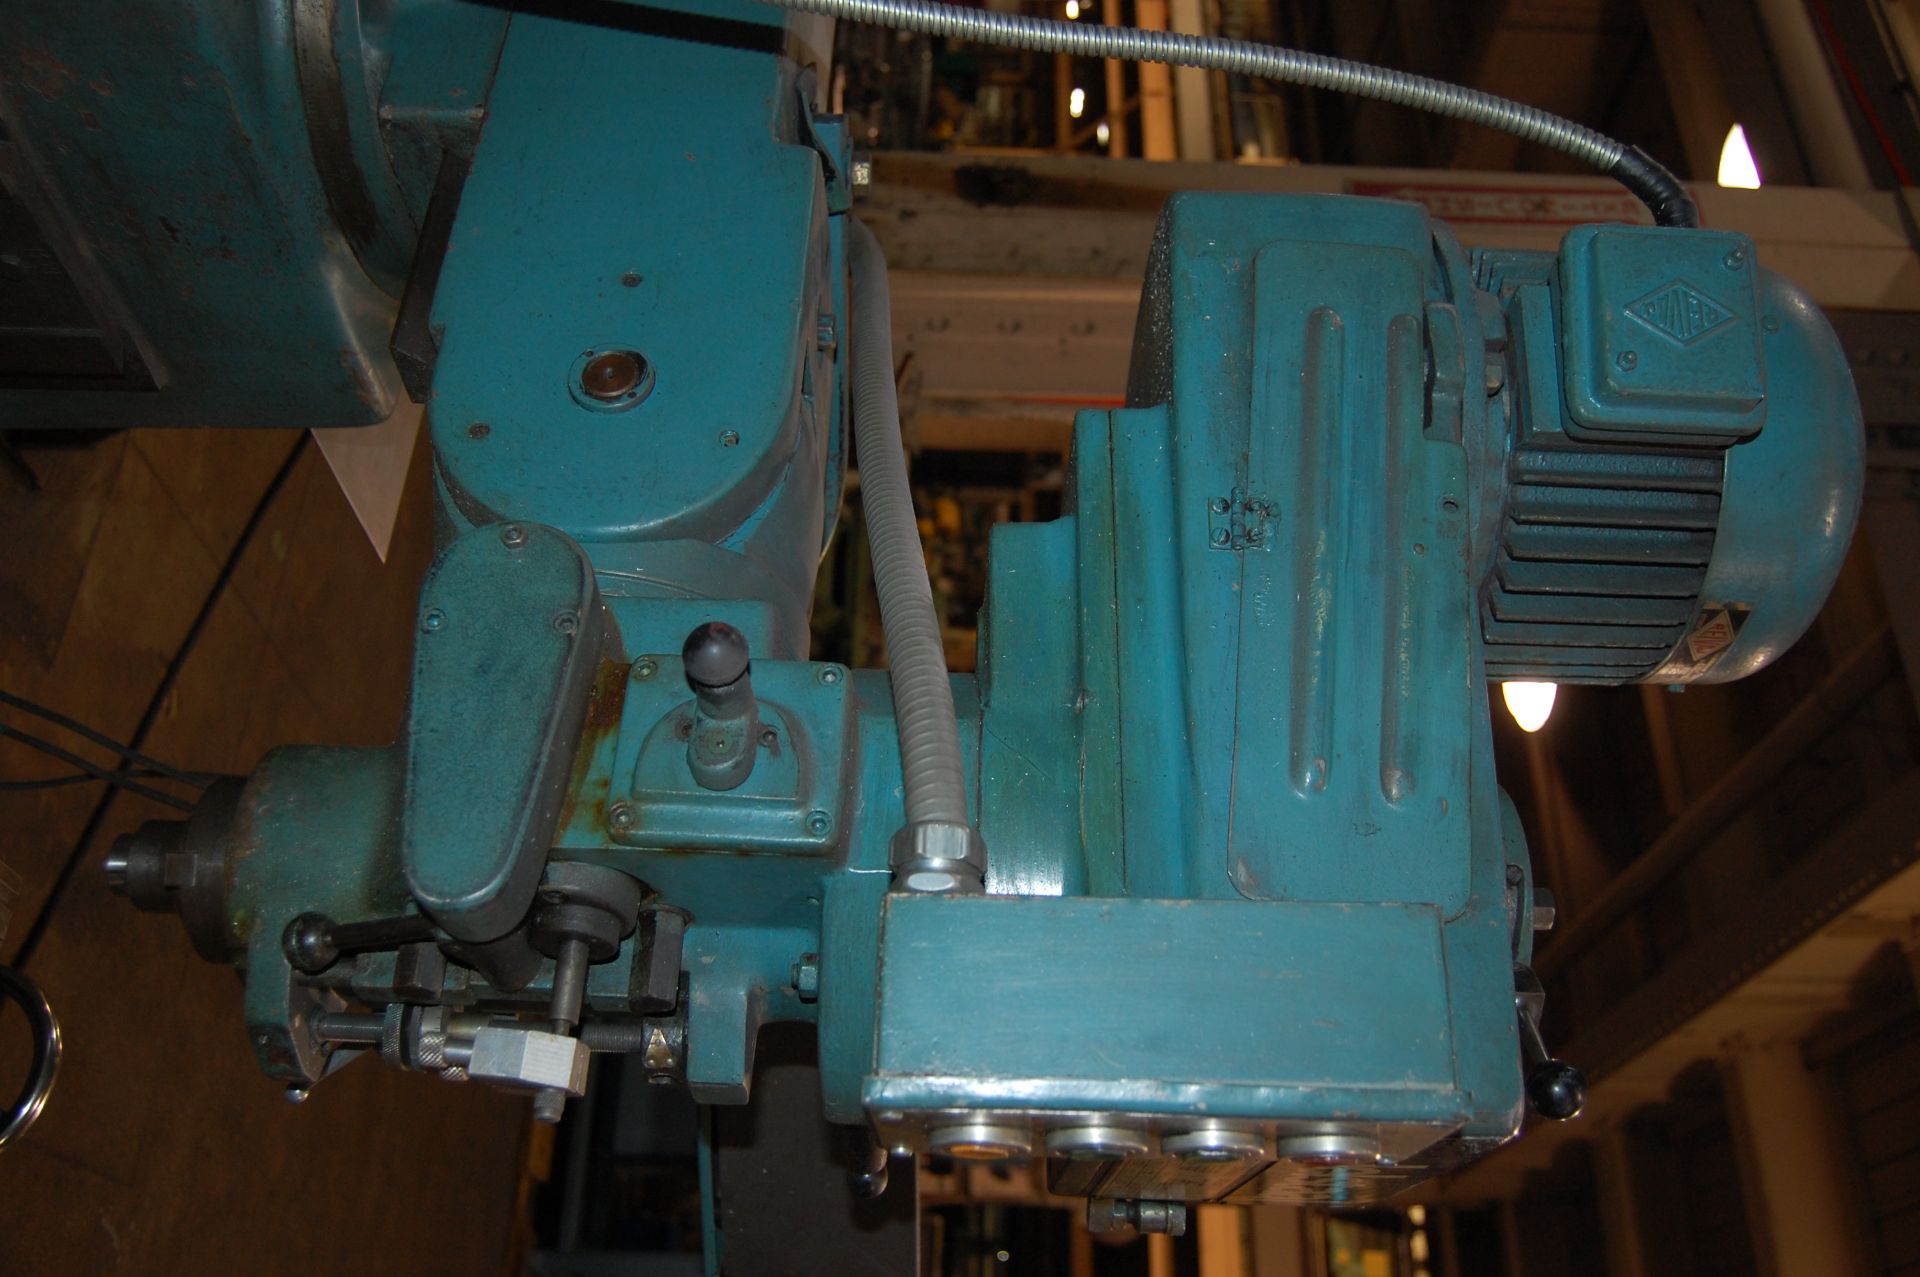 EDESTAAL 1.5HP VERTICAL MILL KNEE-TYPE MILL, R8 SPINDLE, 16-SPINDLE SPEEDS, 67-4600 RPM, 10" X 48" - Image 7 of 13